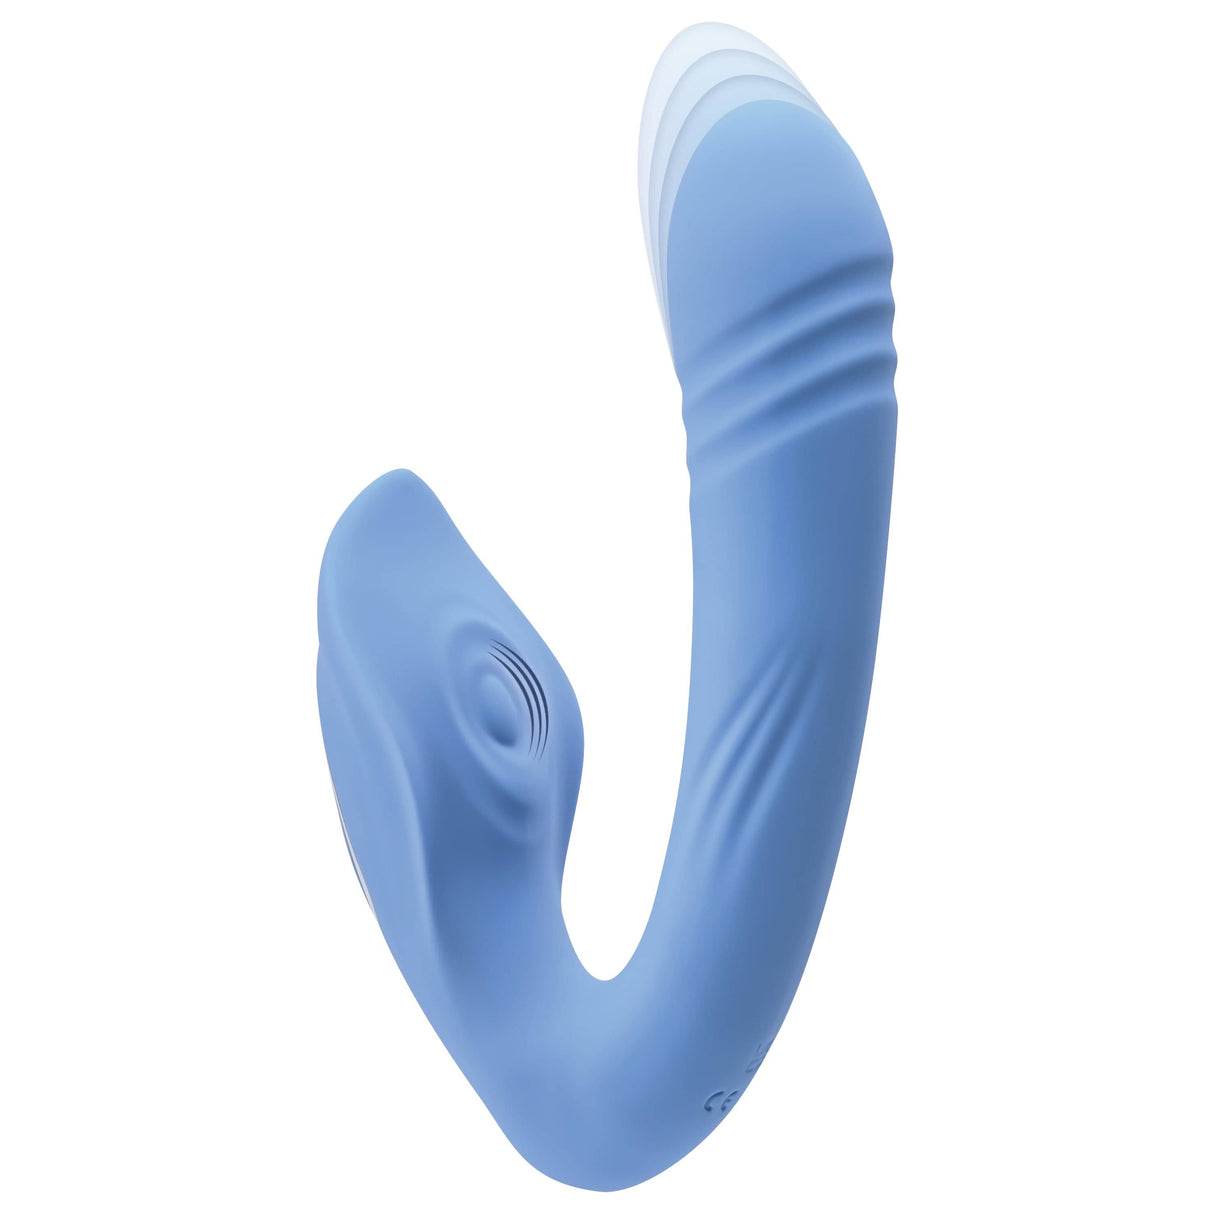 Evolved - Tap and Thrust Curved Vibrator (Blue) EV1093 CherryAffairs